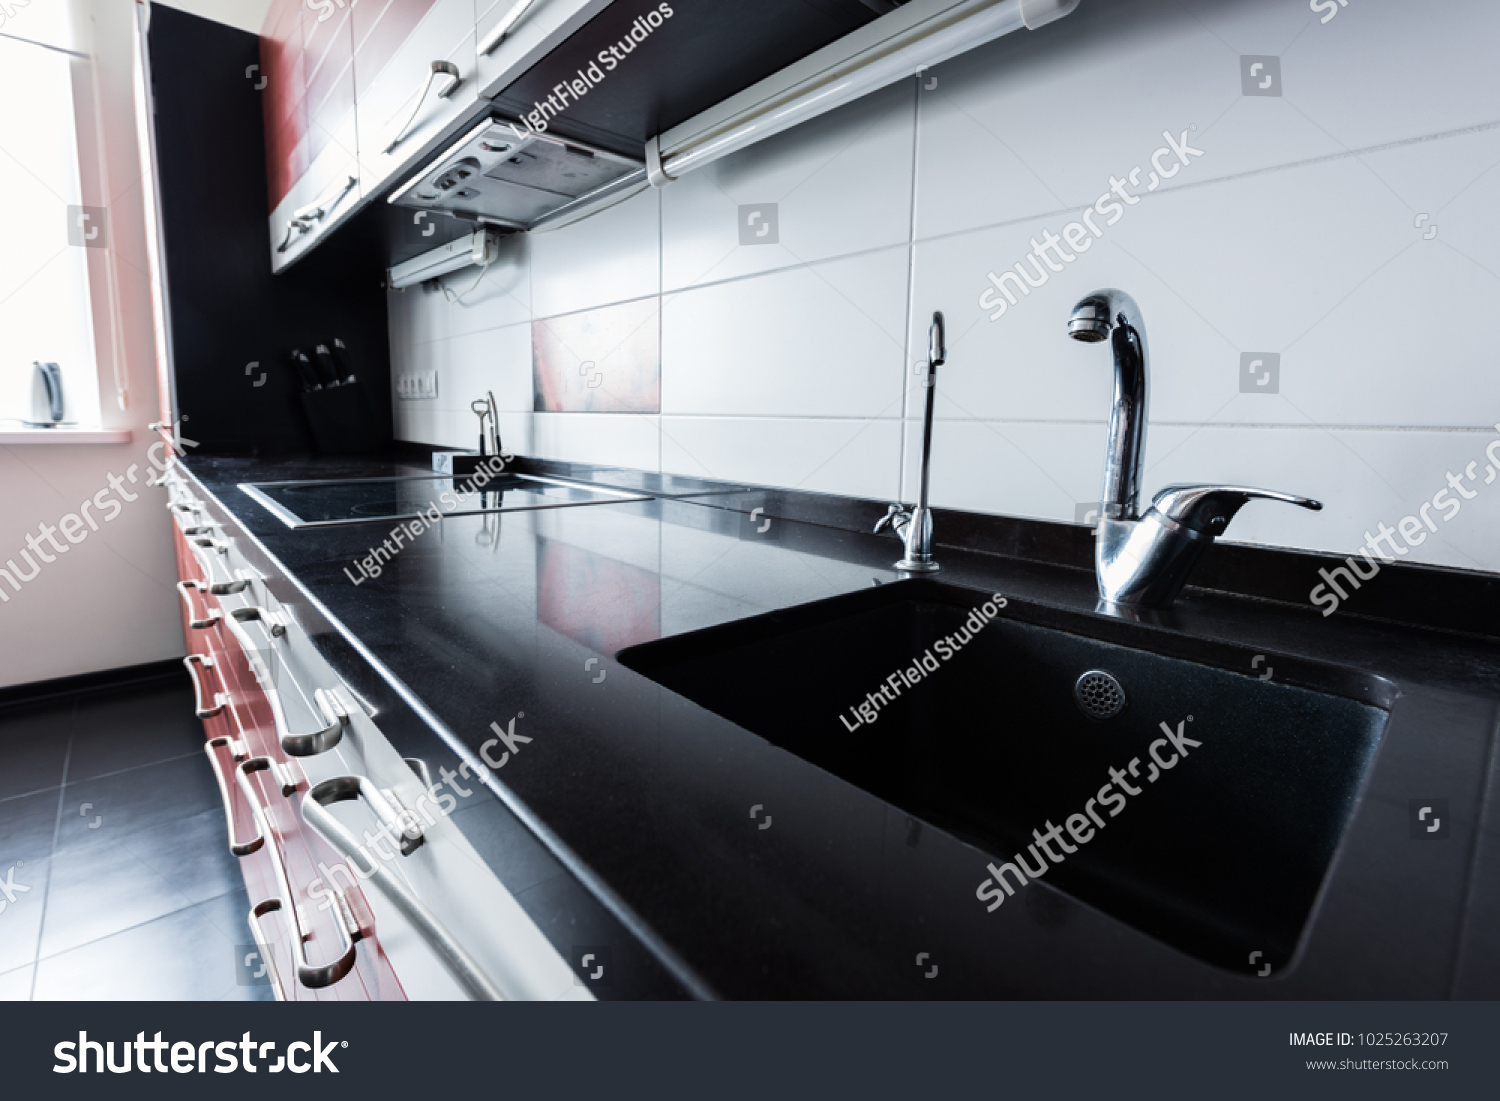 close up view of sink and faucets in kitchen #1025263207